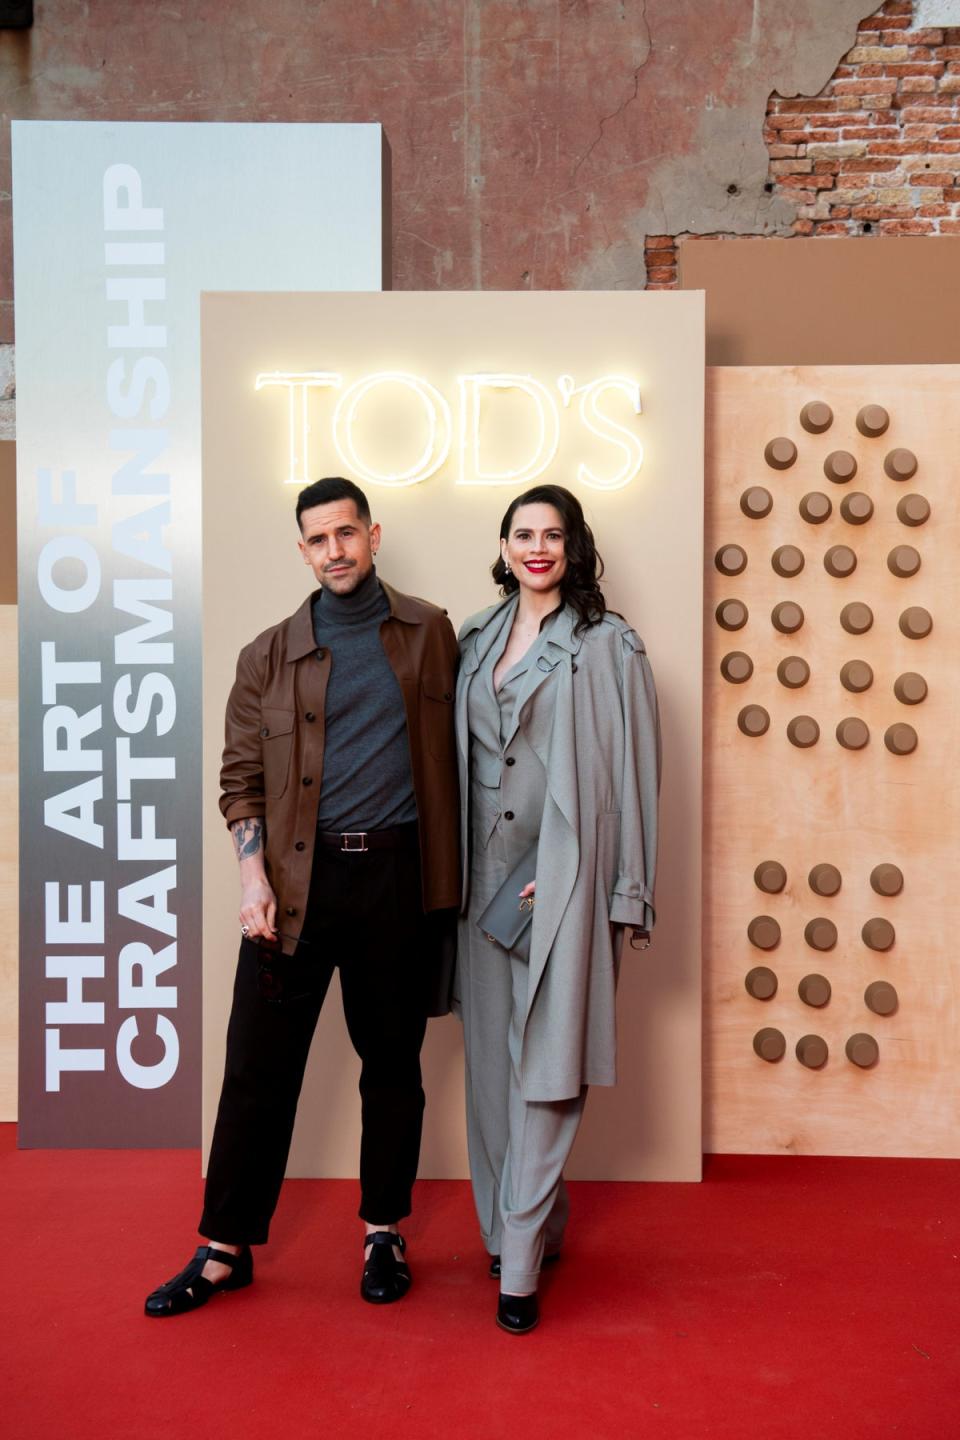 Ned Wolfgang Kelly and Hayley Atwell at the TOD'S The Art of Craftsmanship cocktail extravaganza (TOD'S)